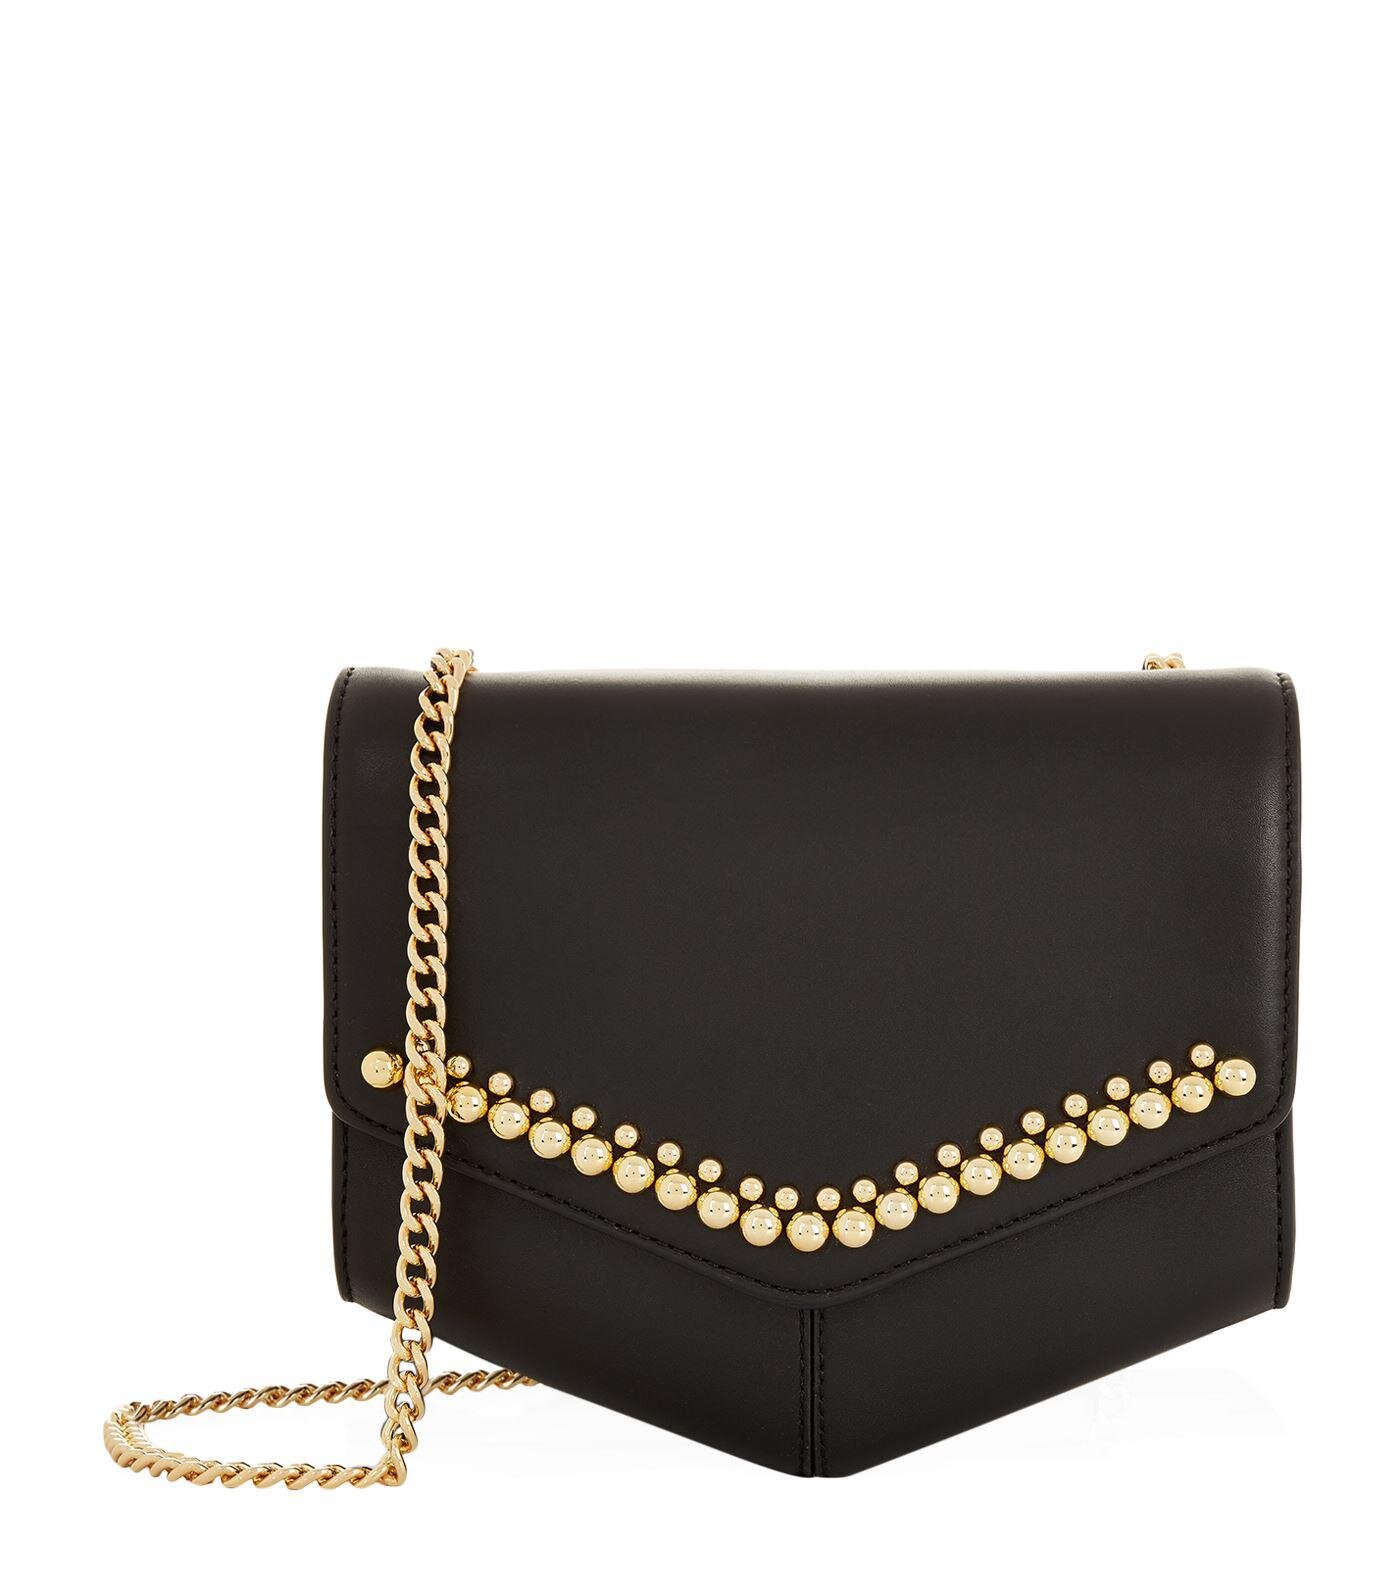 Sandro Lou Bag in Black Leather with Embellishment — UFO No More